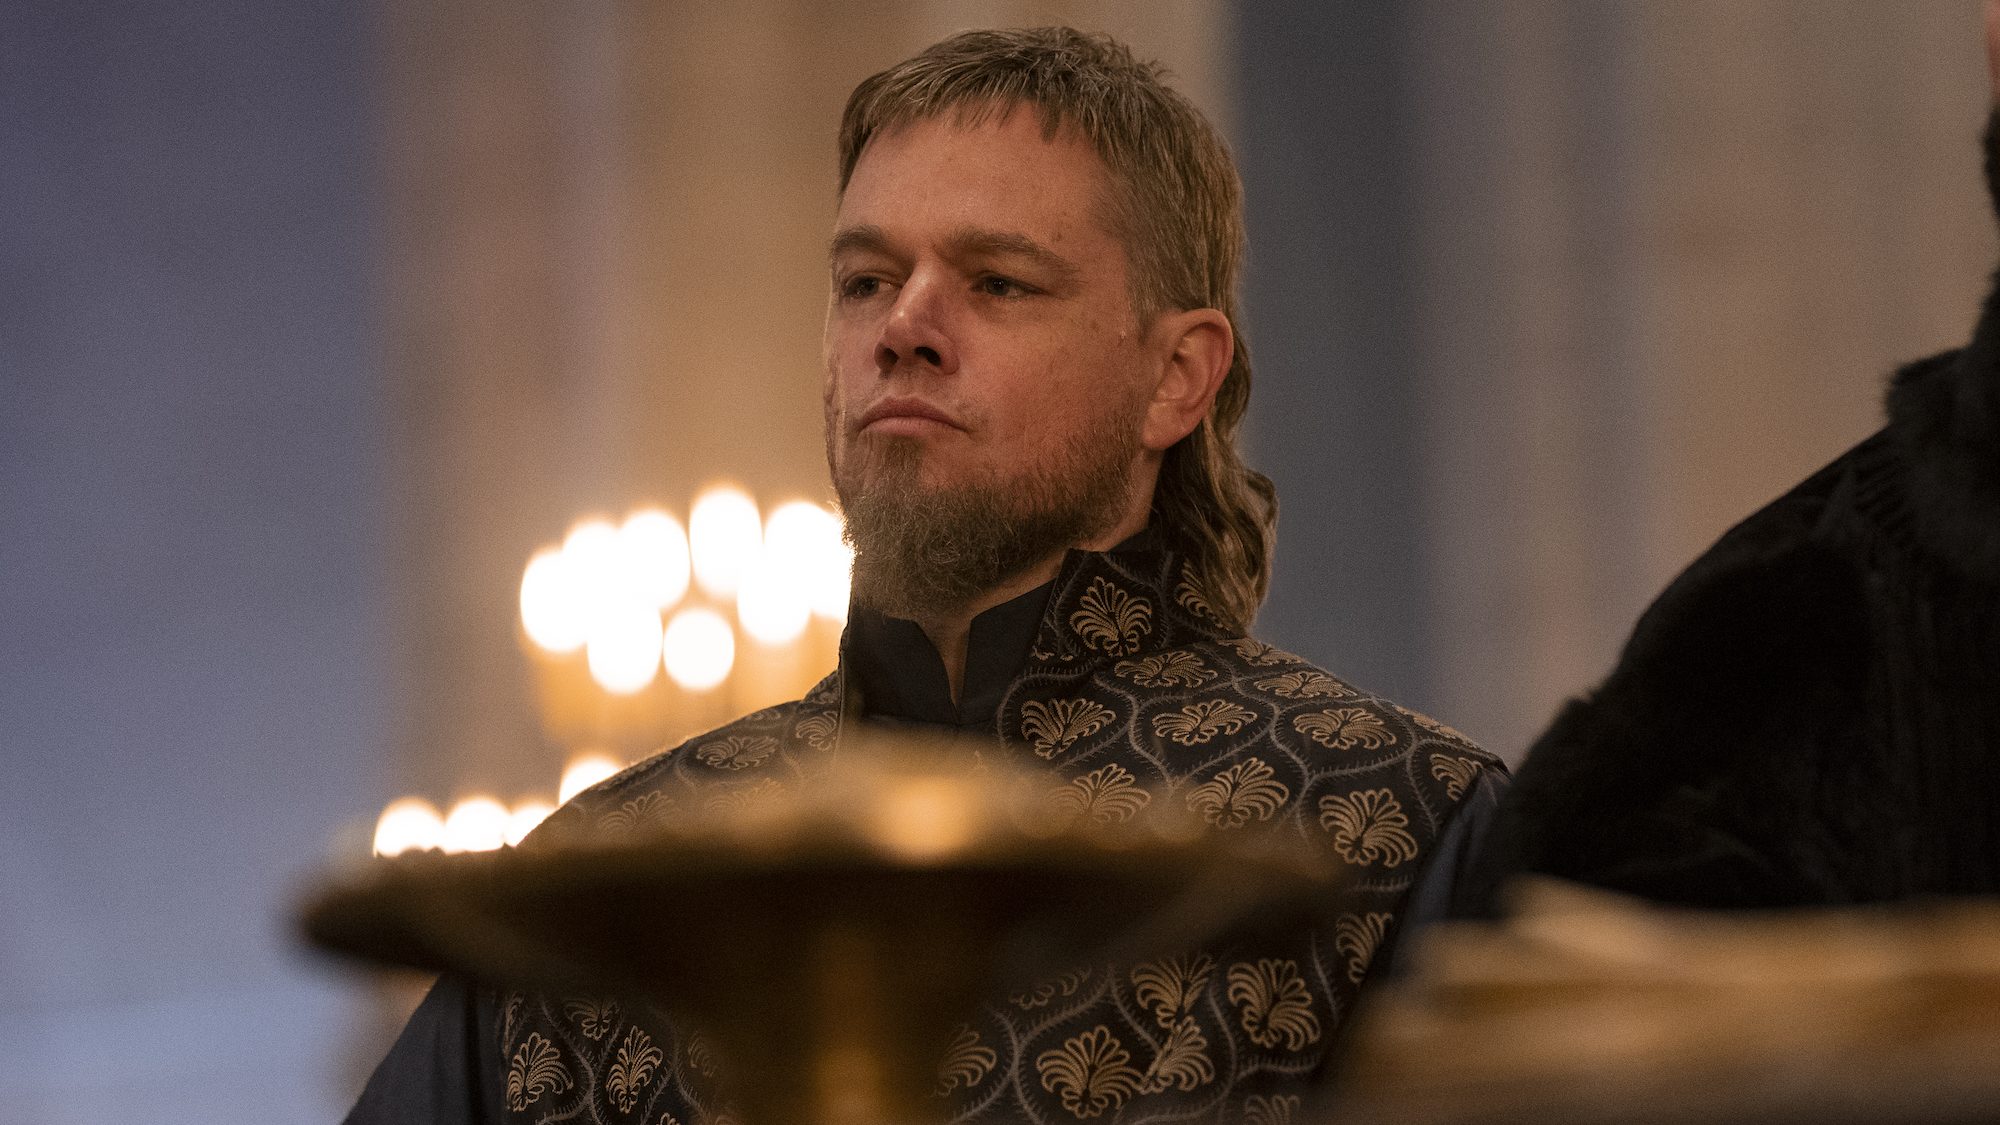 Matt Damon as Jean de Carrouges in the new medieval epic THE LAST DUEL directed by Ridley Scott.